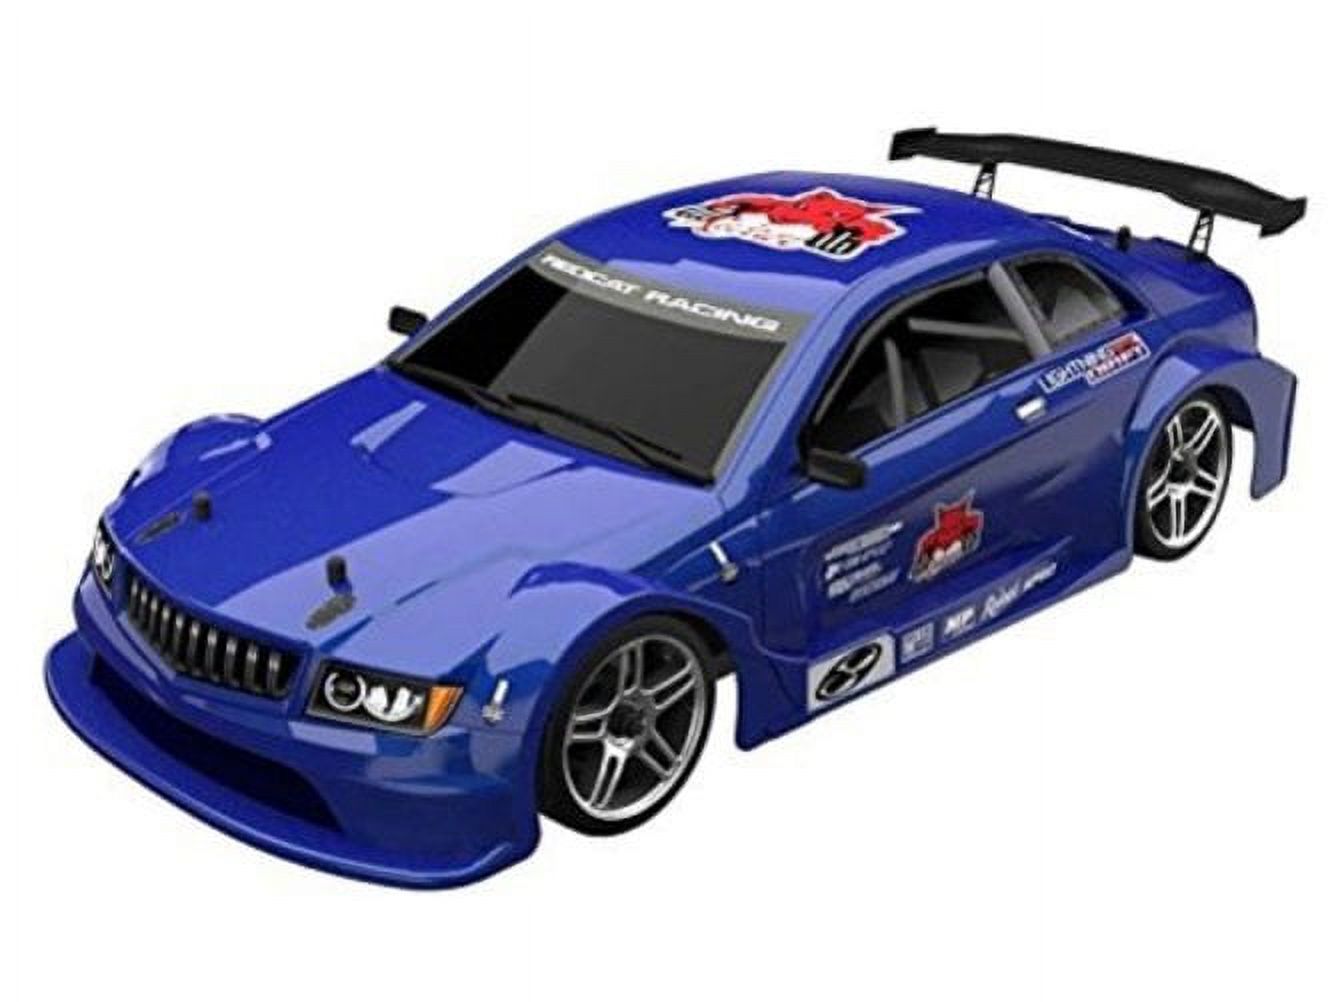 Redcat Racing 1/10 Lightning EPX Drift 4 Wheel Drive Brushed RTR Ready to Run Blue RER08003 Cars Electric RTR 1/10 Off-Road - image 1 of 11